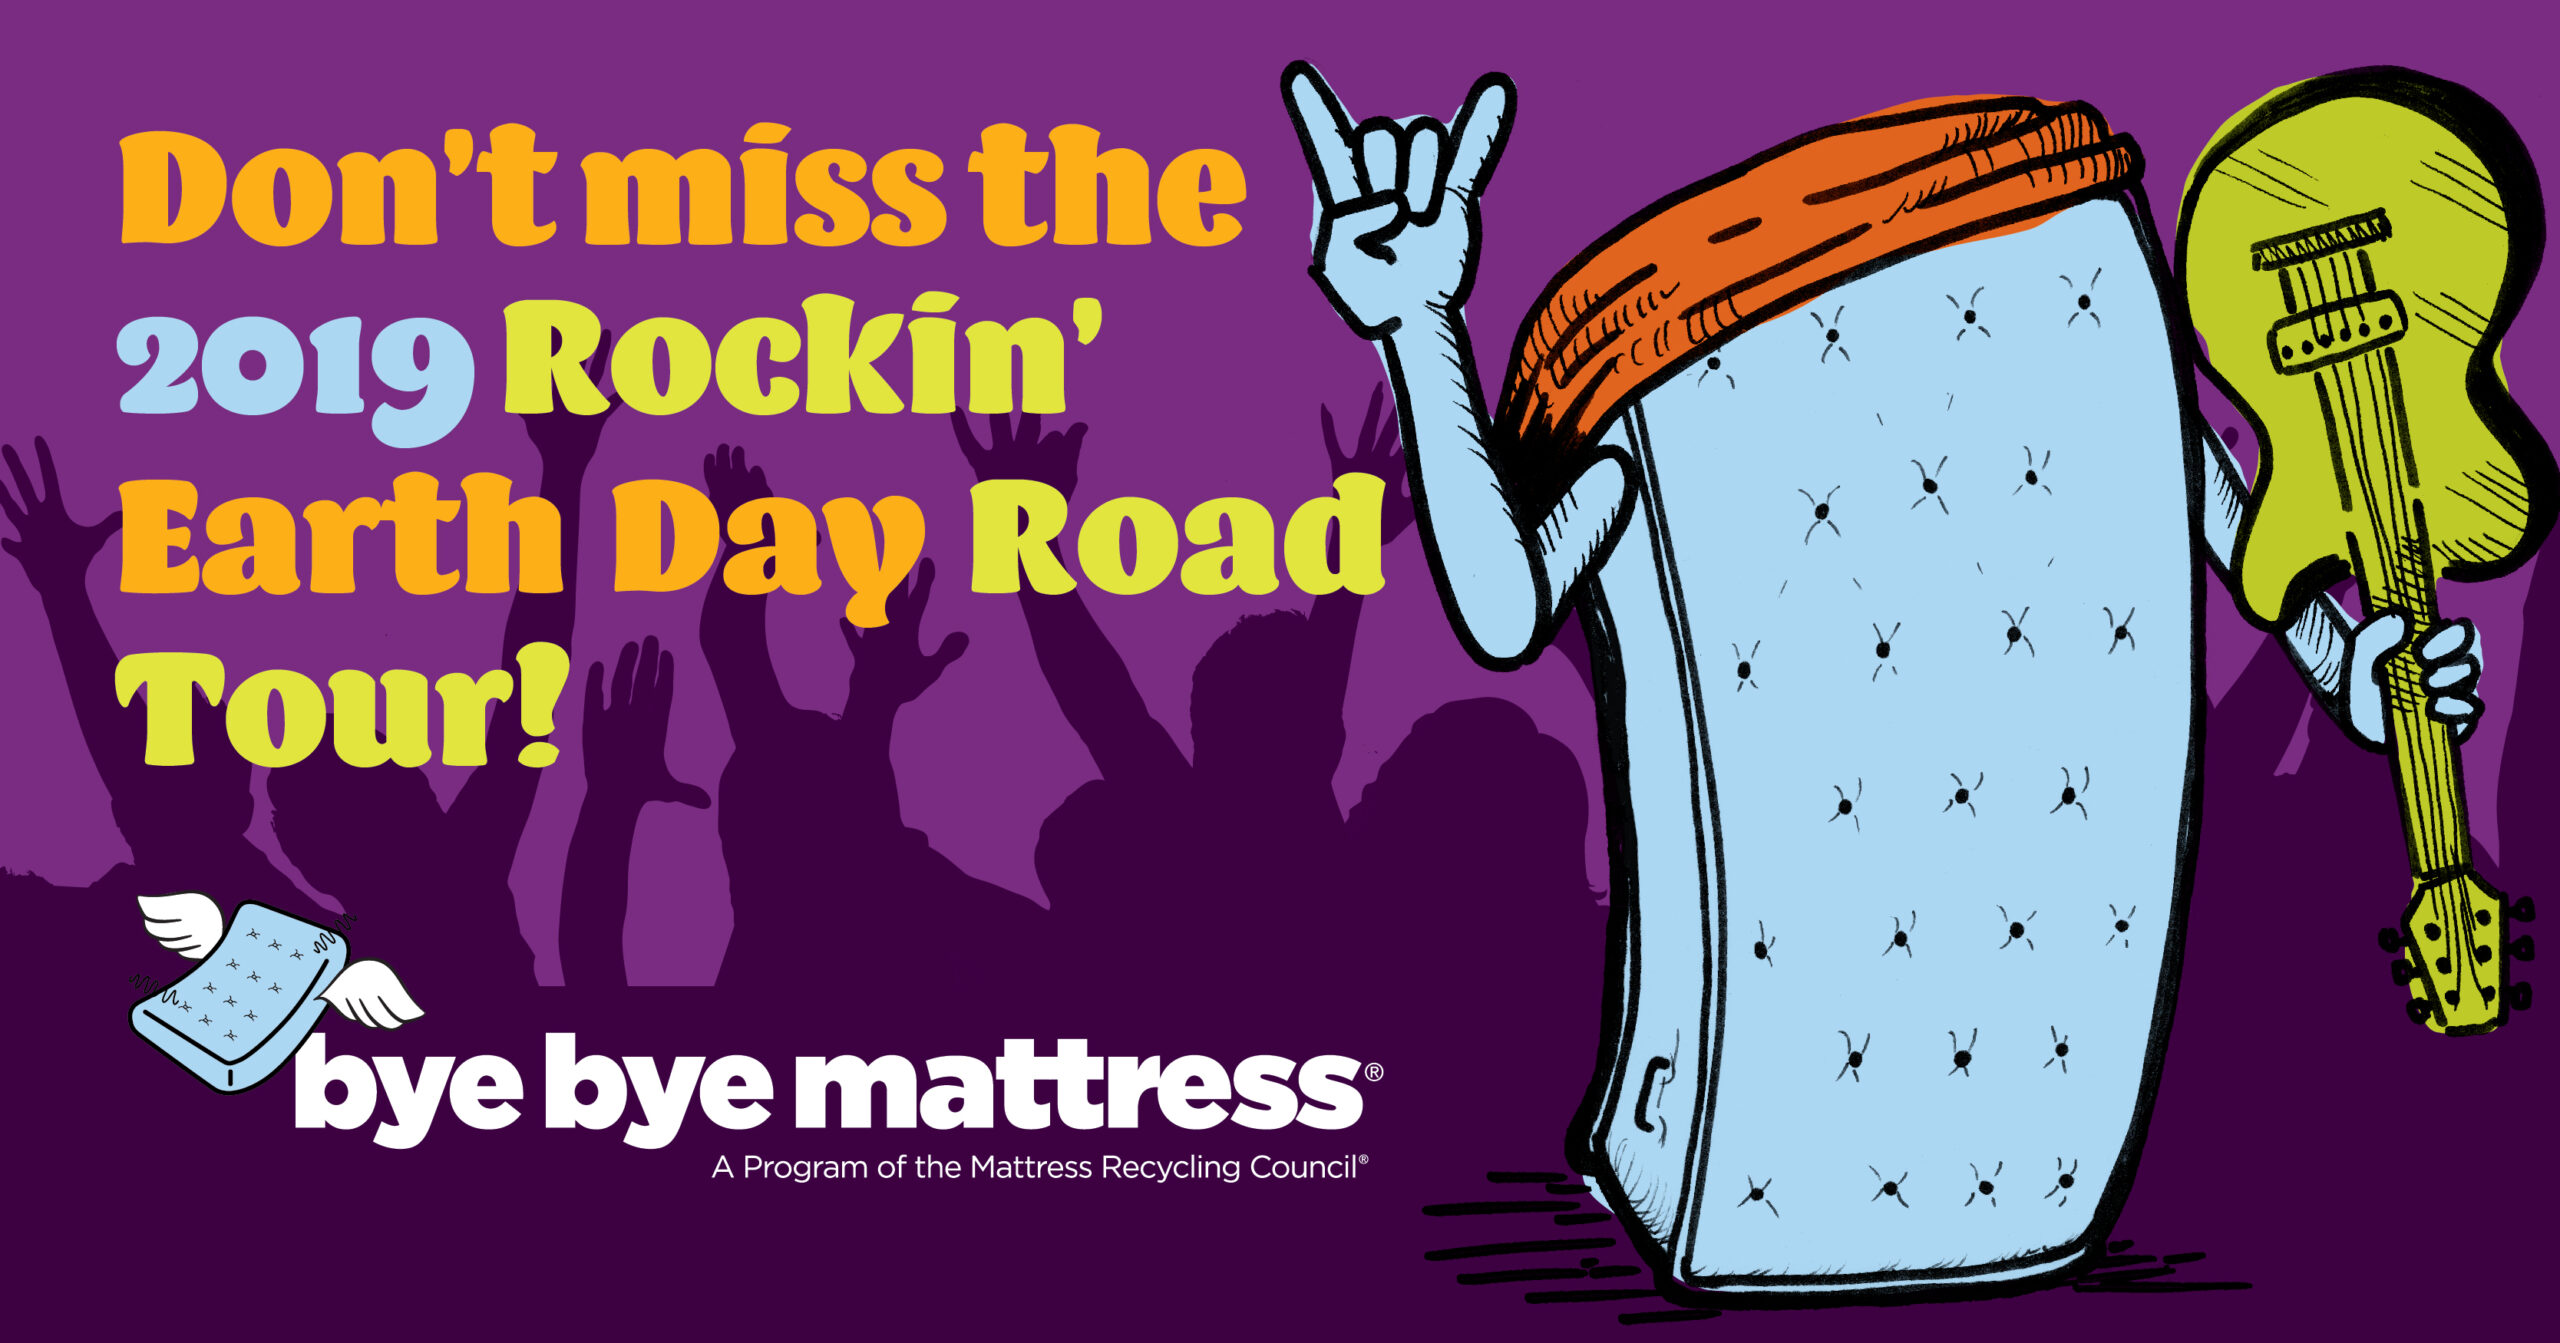 Social creative with a mattress dressed like a rockstar to promote Earth Day events road tour. The text reads 'Don't miss the 2019 Rockin' Earth Day Road Tour.'